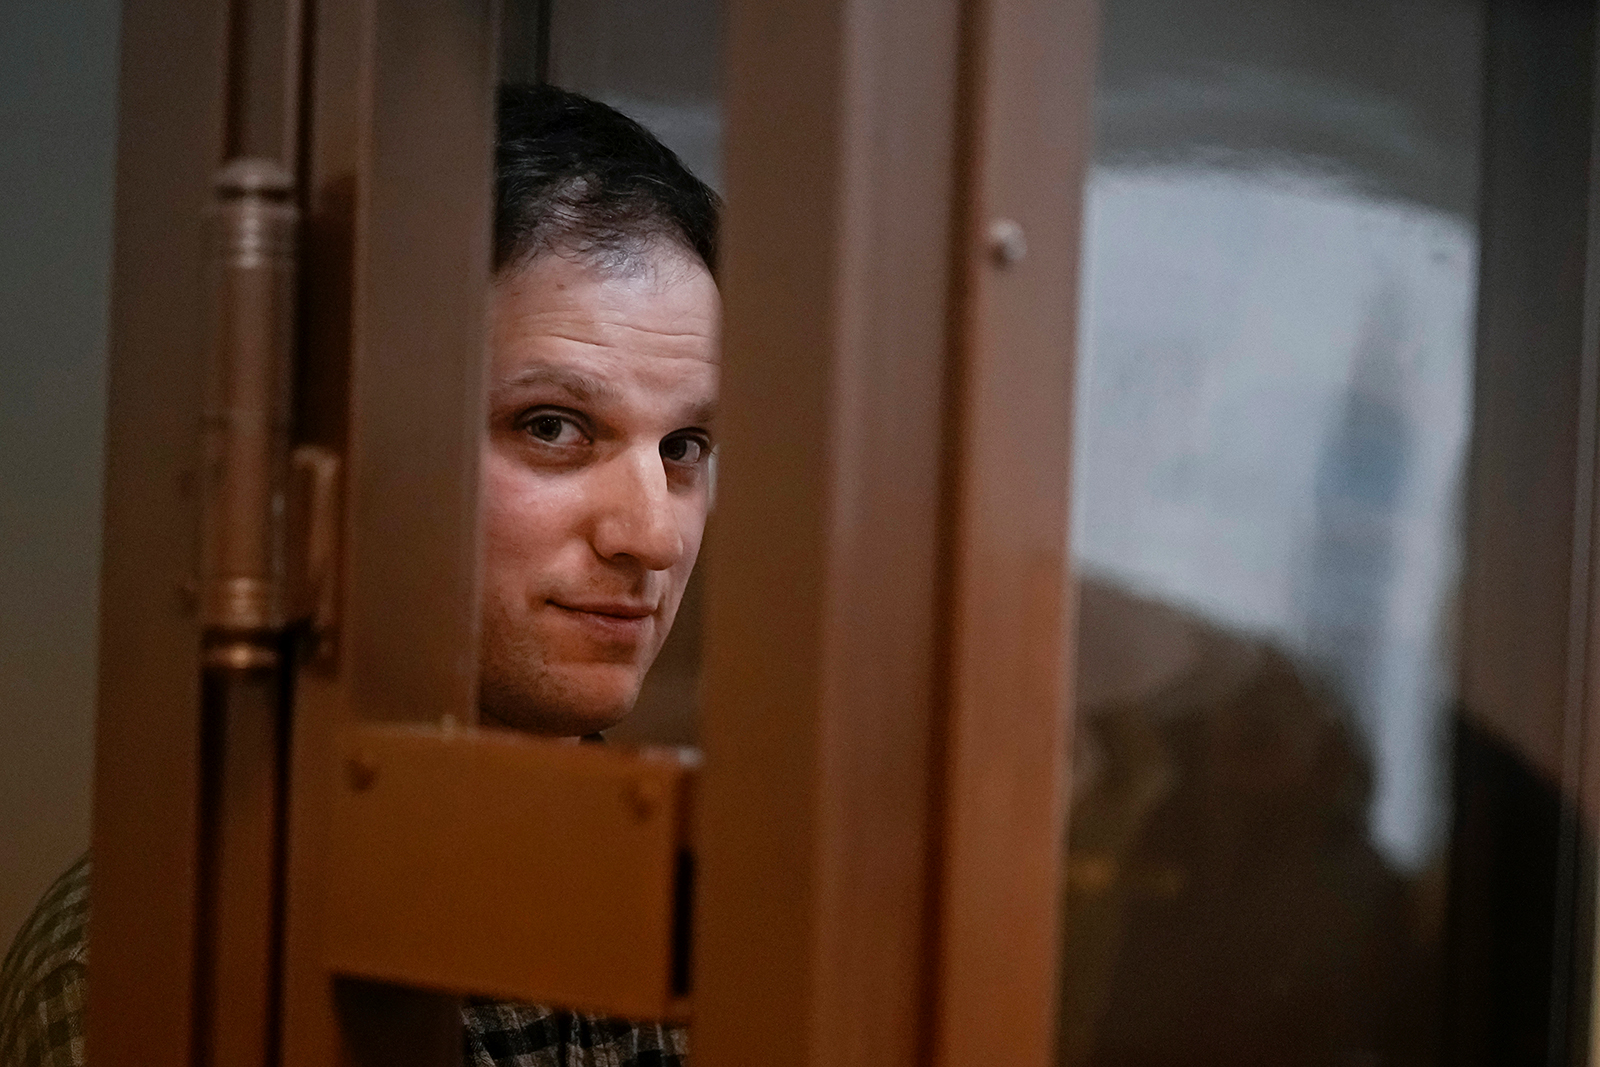 Evan Gershkovich stands in a glass cage in a courtroom at the Moscow City Court, in Moscow, Russia, on April 18.